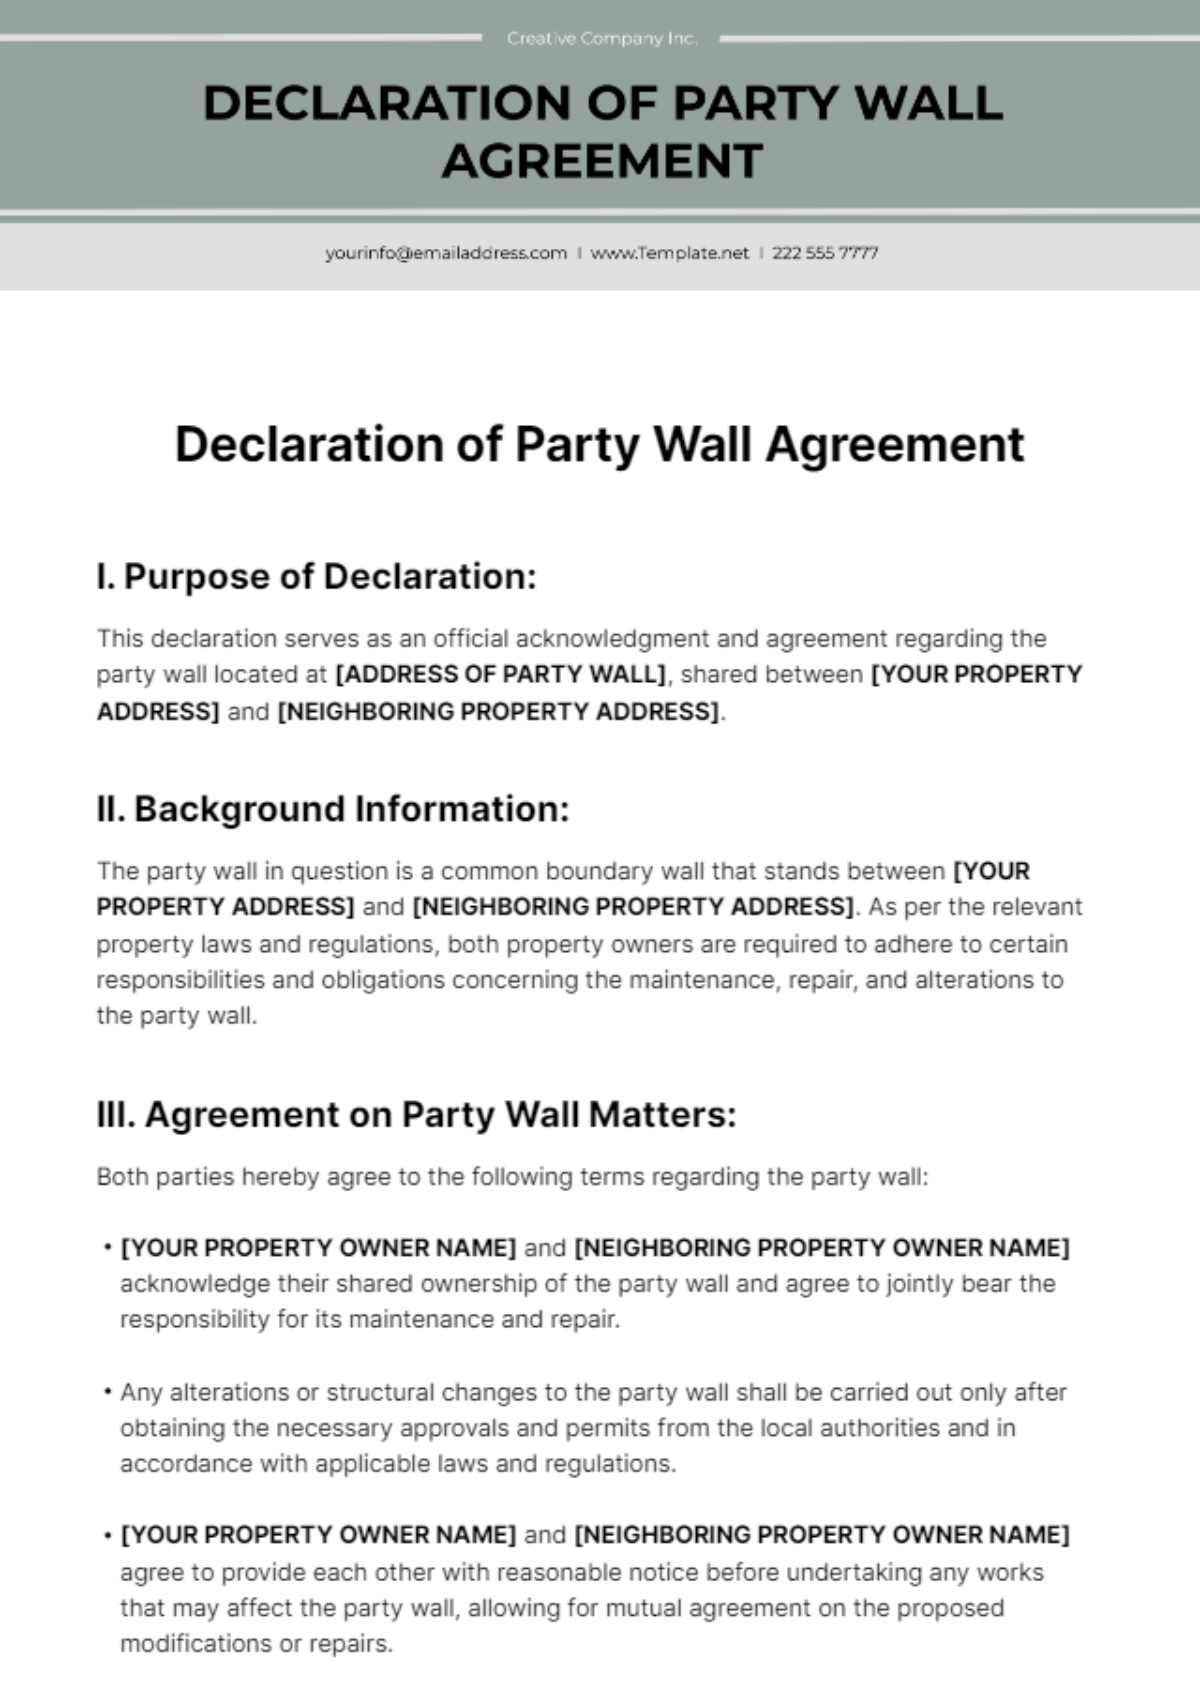 Declaration of Party Wall Template